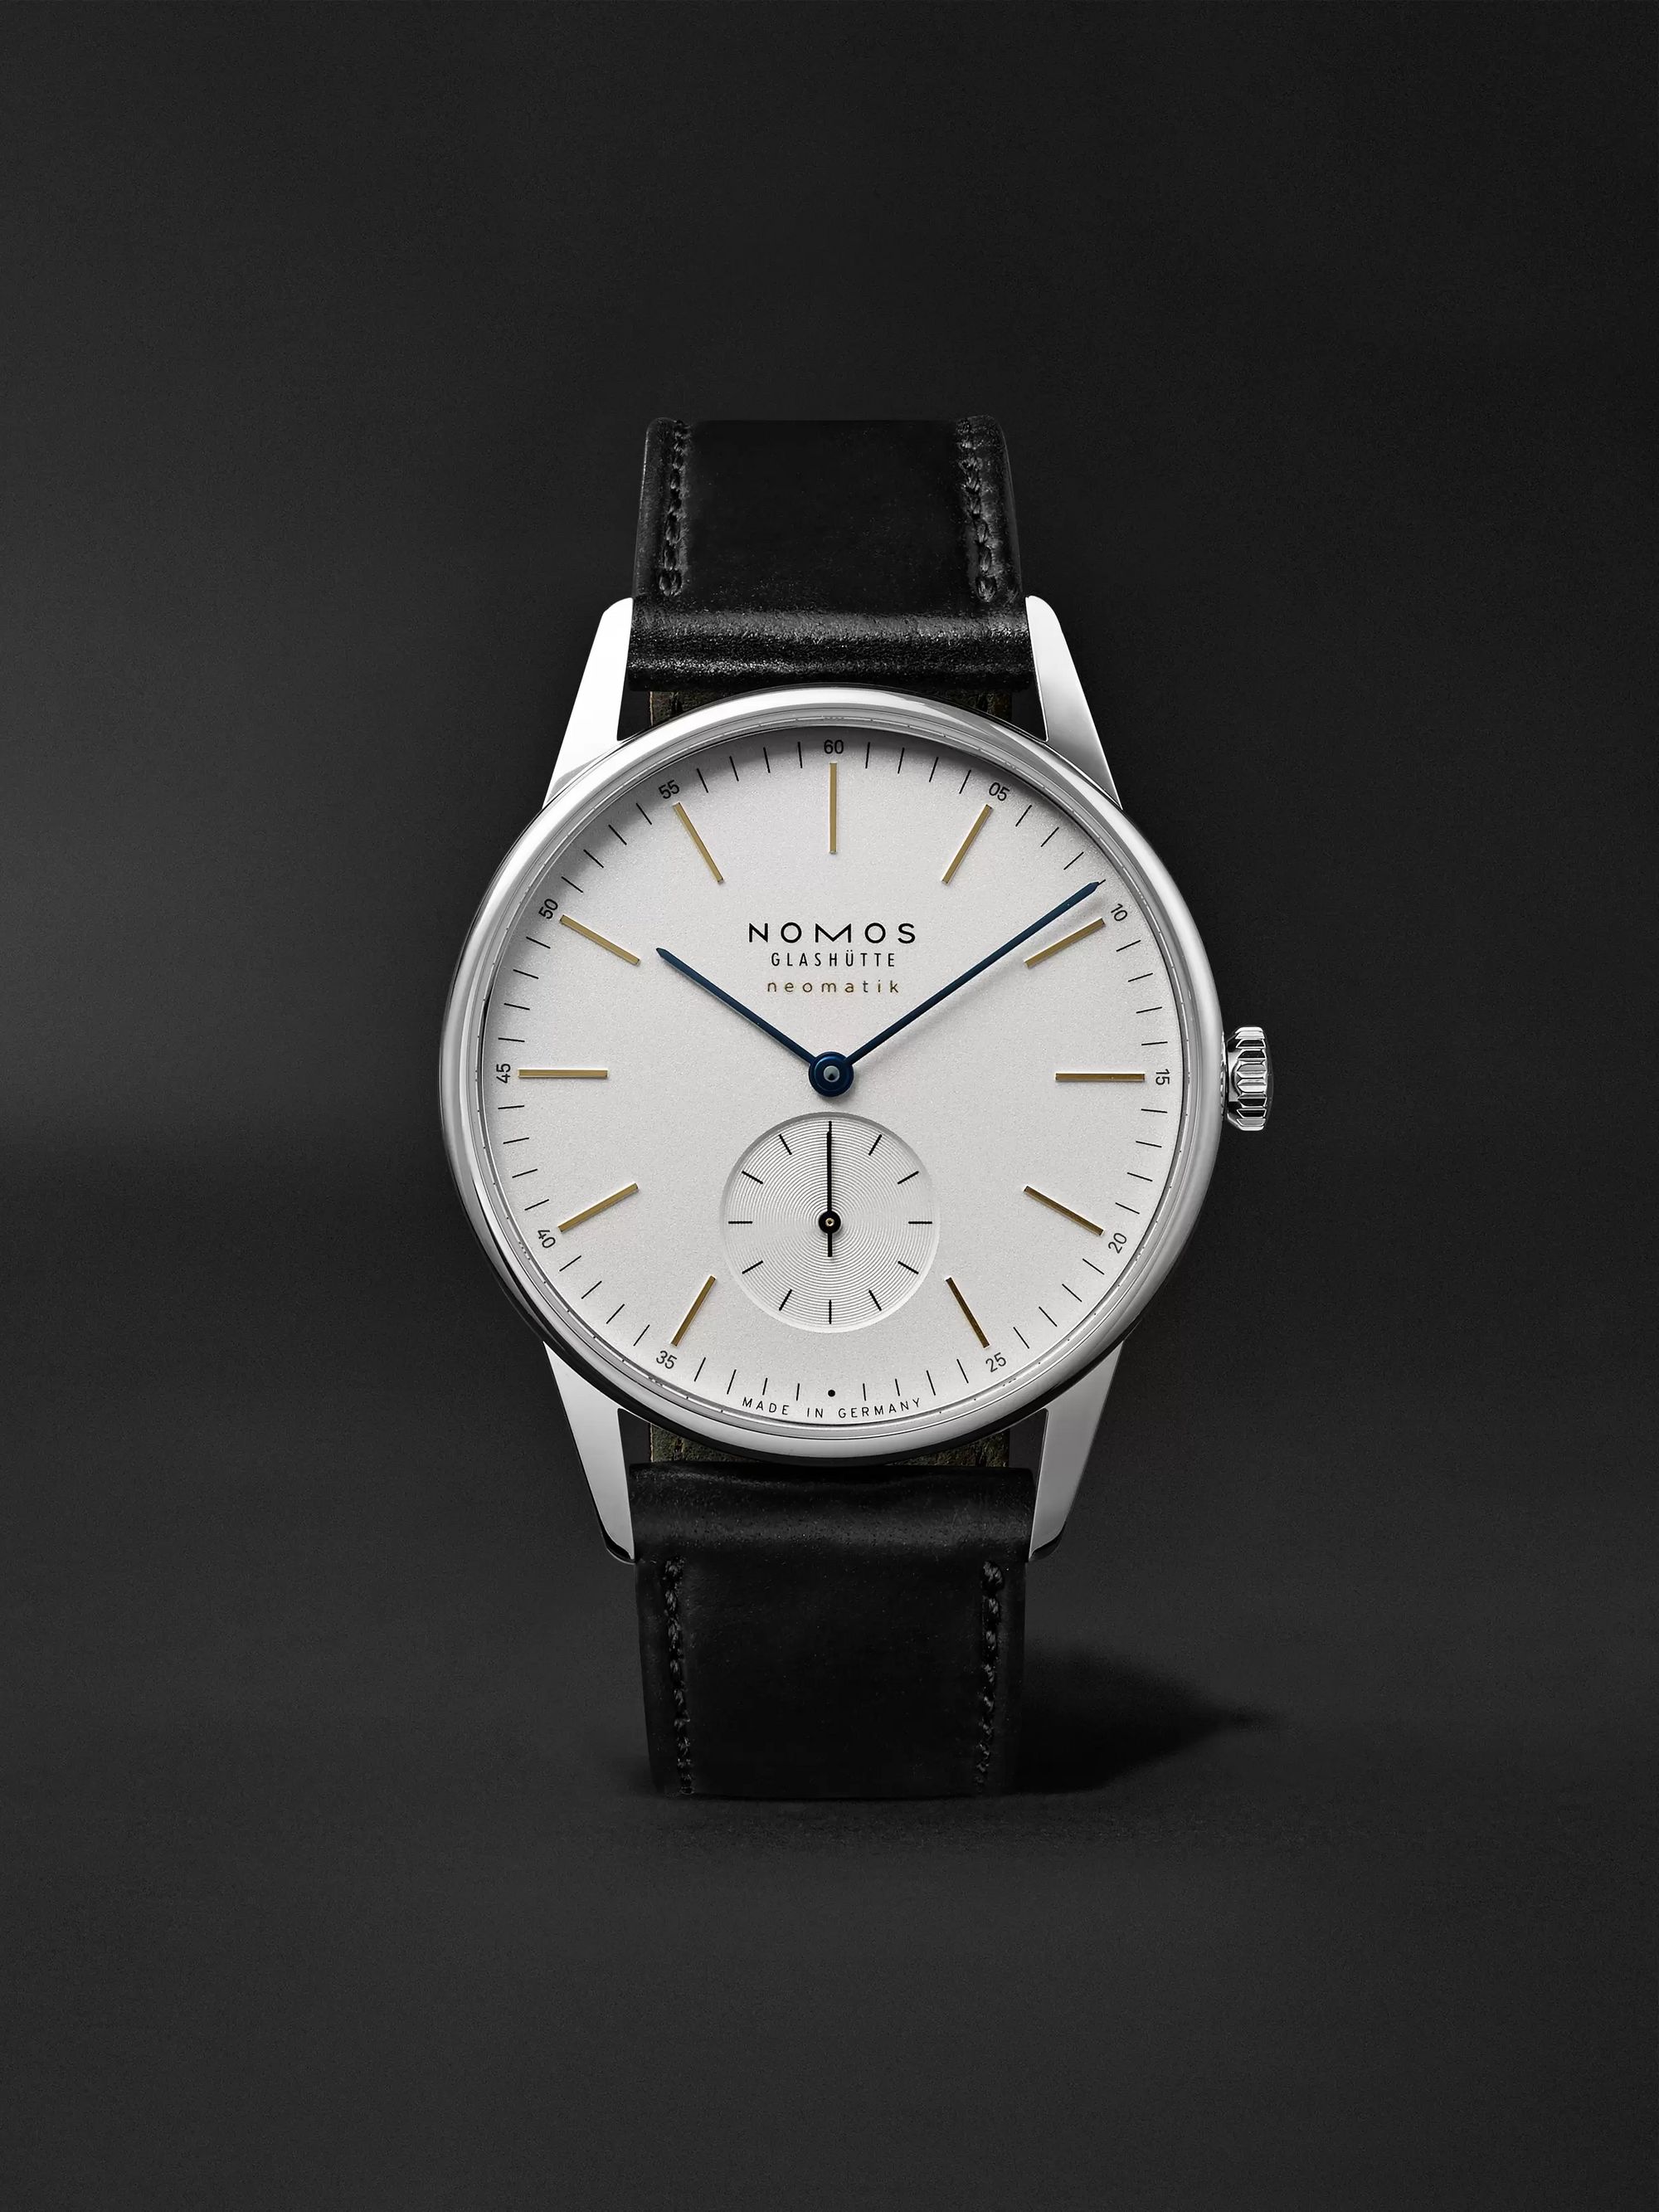 NOMOS GLASHÜTTE At Work Orion Neomatik Automatic 39mm Stainless Steel and Leather Watch, Ref. No. 340